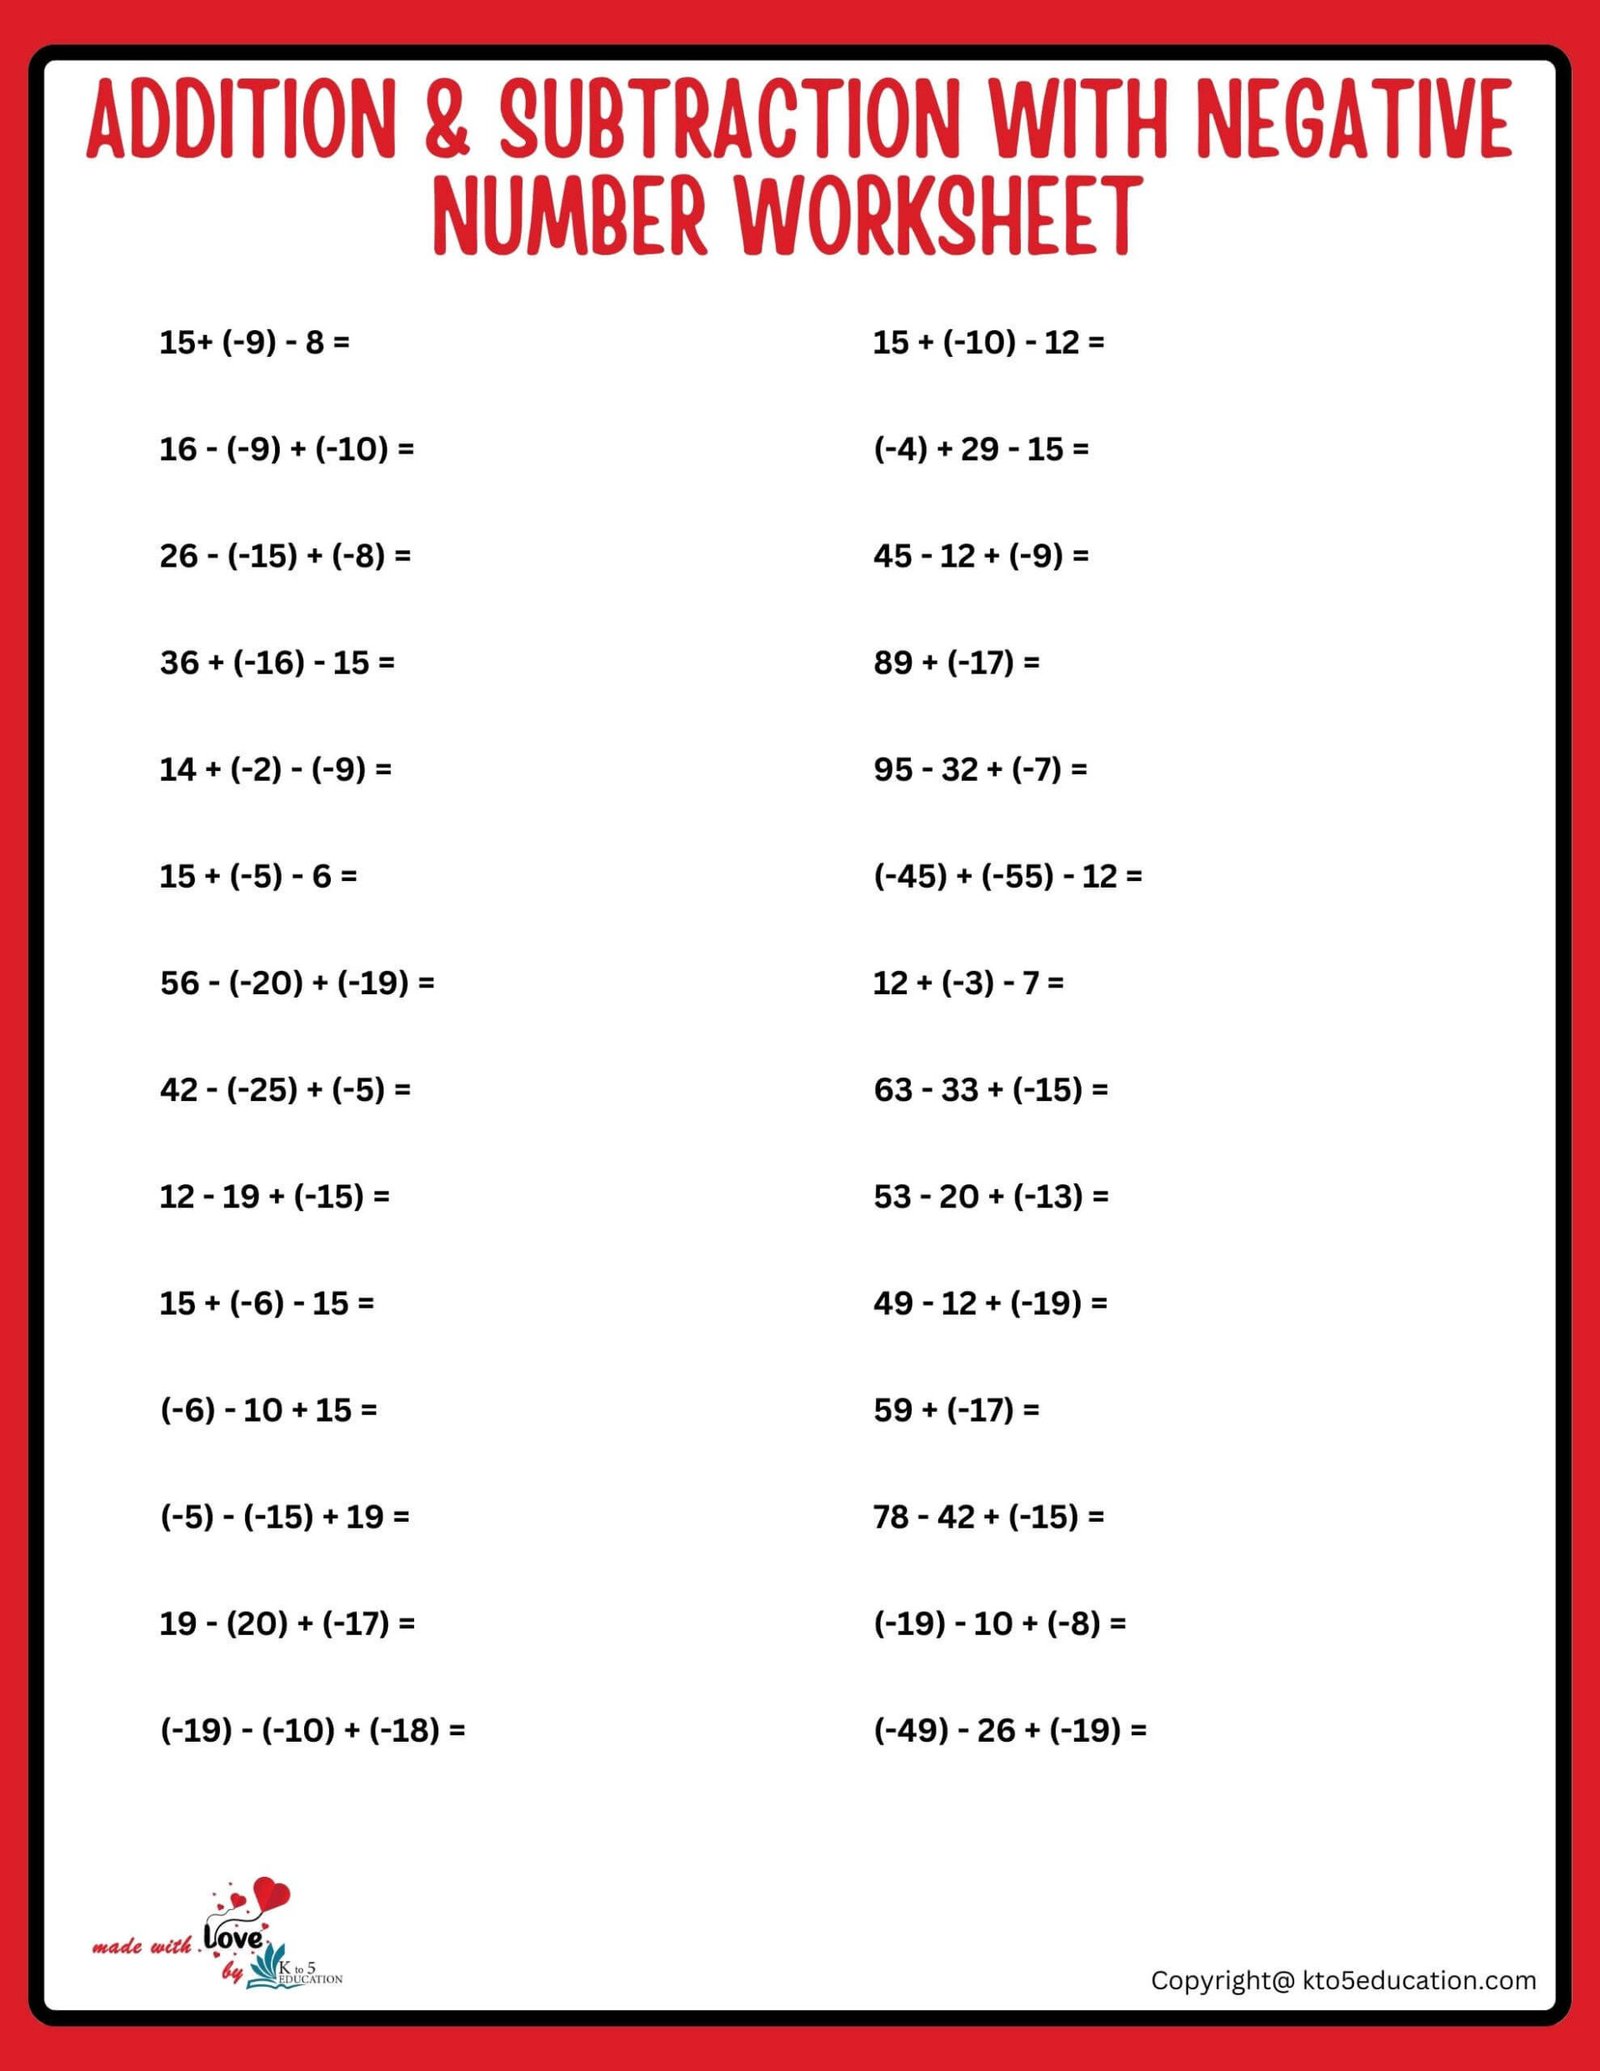 Negative And Positive Addition And Subtraction Worksheets